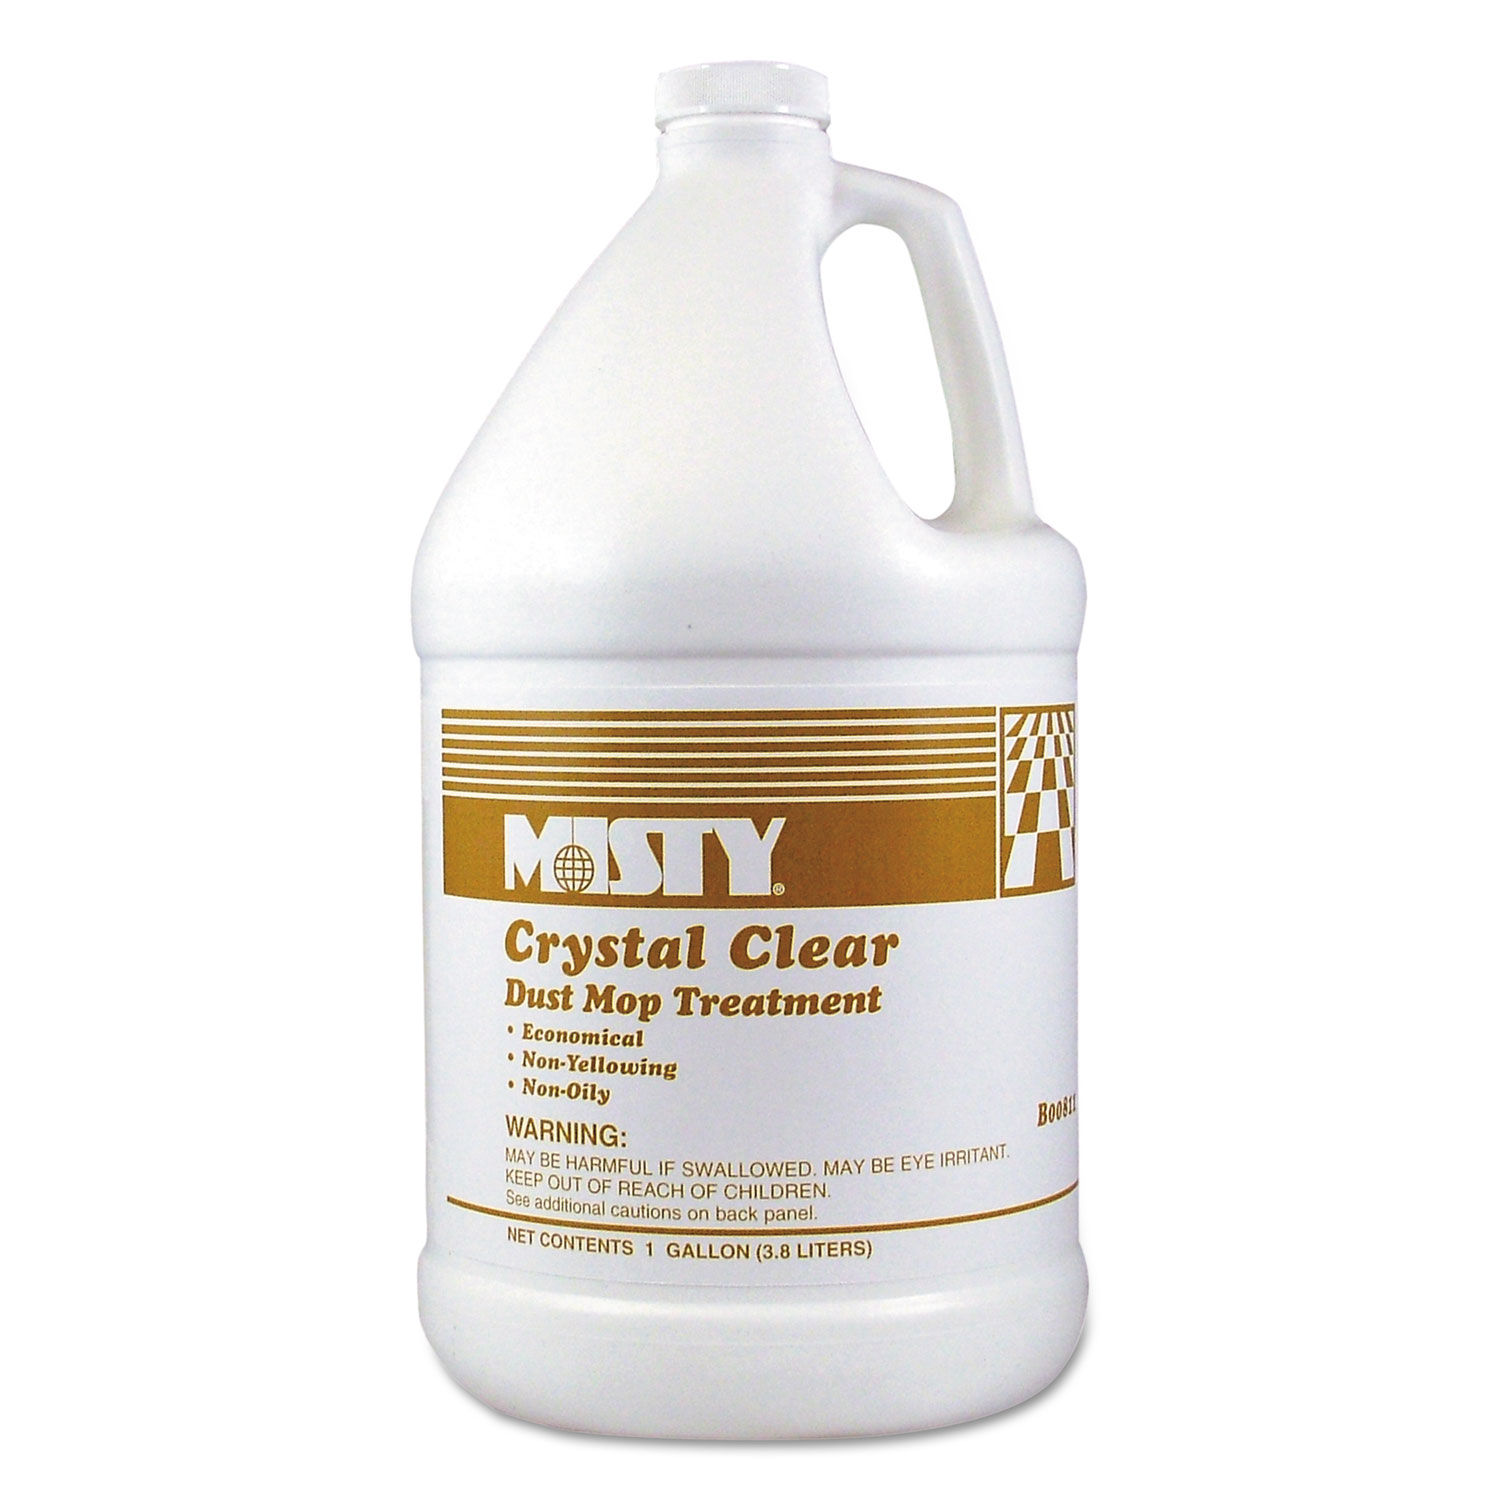 Dust clears. Кристал клеар. Crystalline Clear. Crystal Clear USA. Crystal Clear Steam Cleaning.